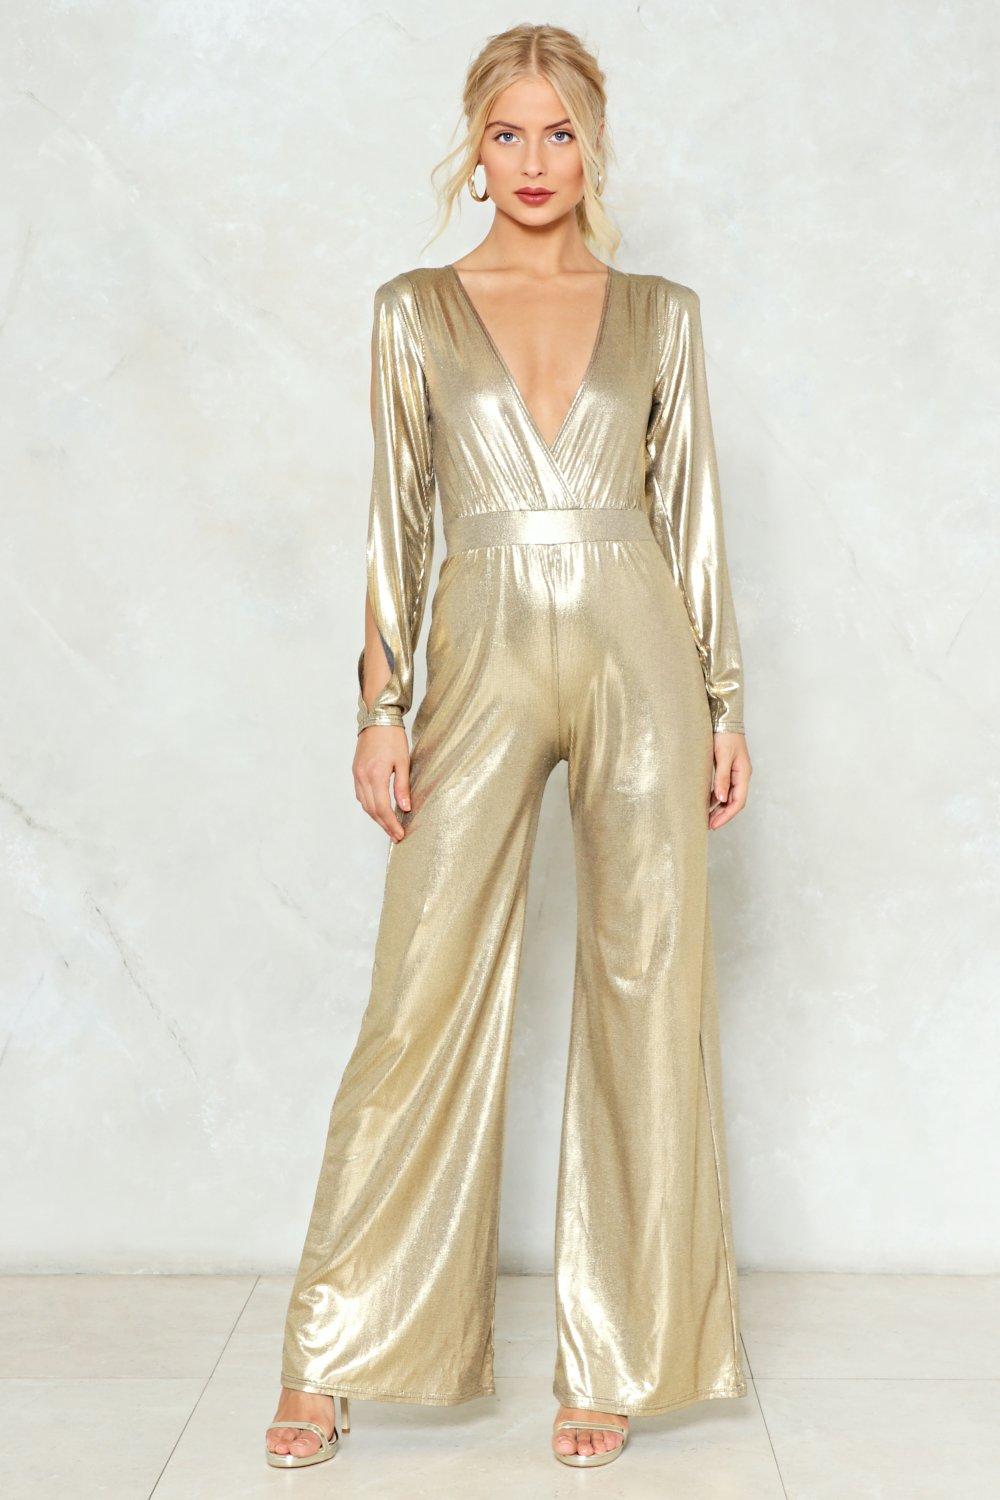 Dripping in Gold Metallic Jumpsuit | Nasty Gal